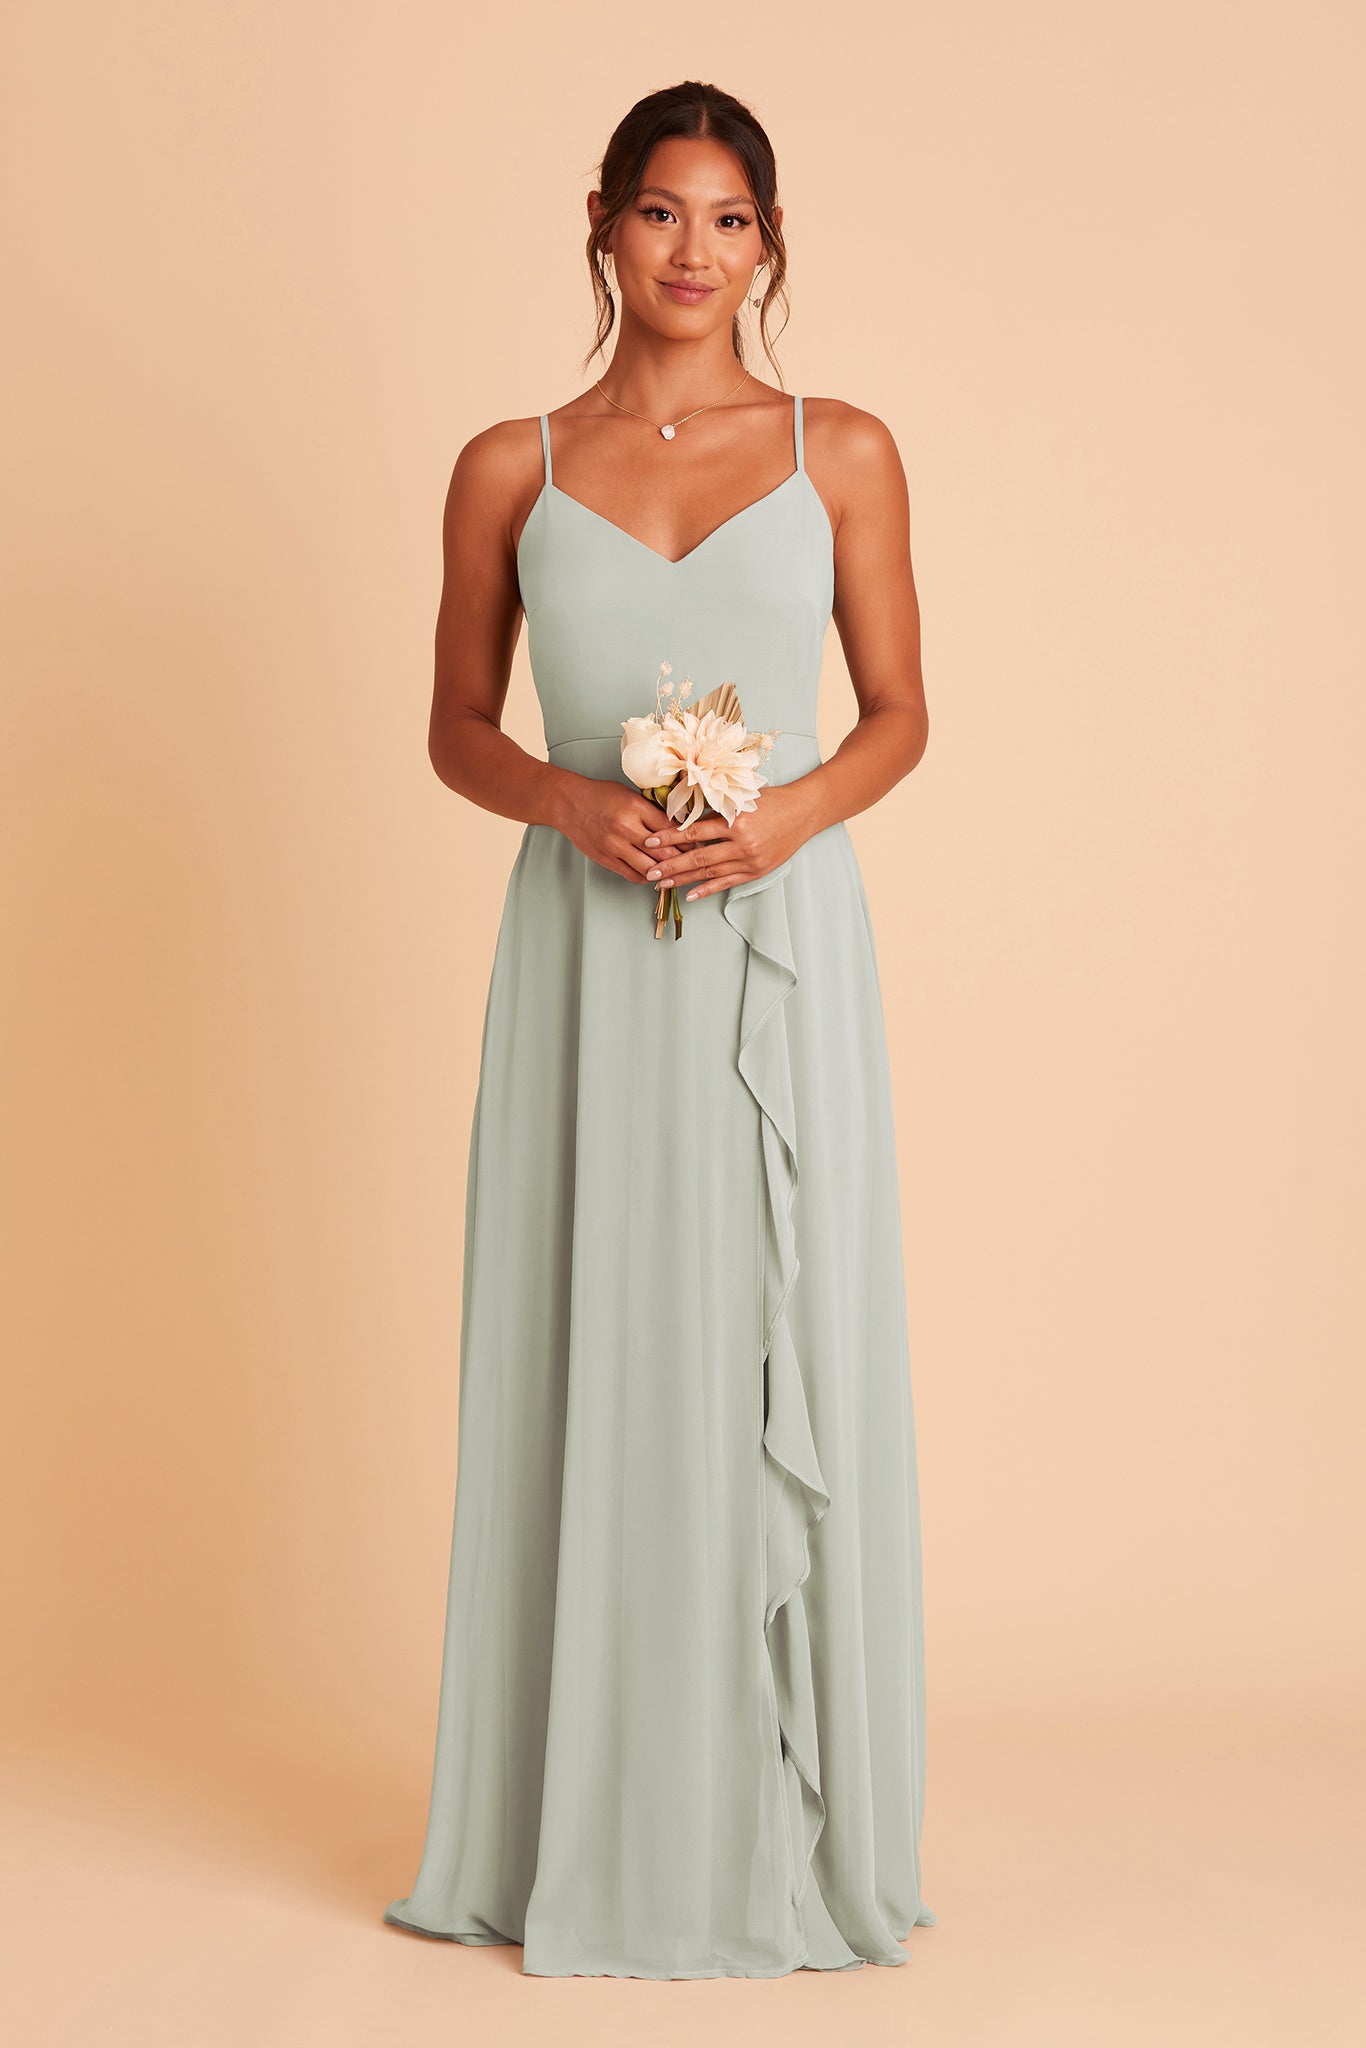 Front view of the Theresa Dress in sage chiffon with the optional slit shows a slender model with a medium skin tone wearing a floor length, A-line dress with a sweeping column skirt and ruffle along the slit of the skirt. The fitted V-neck bodice with spaghetti straps. 